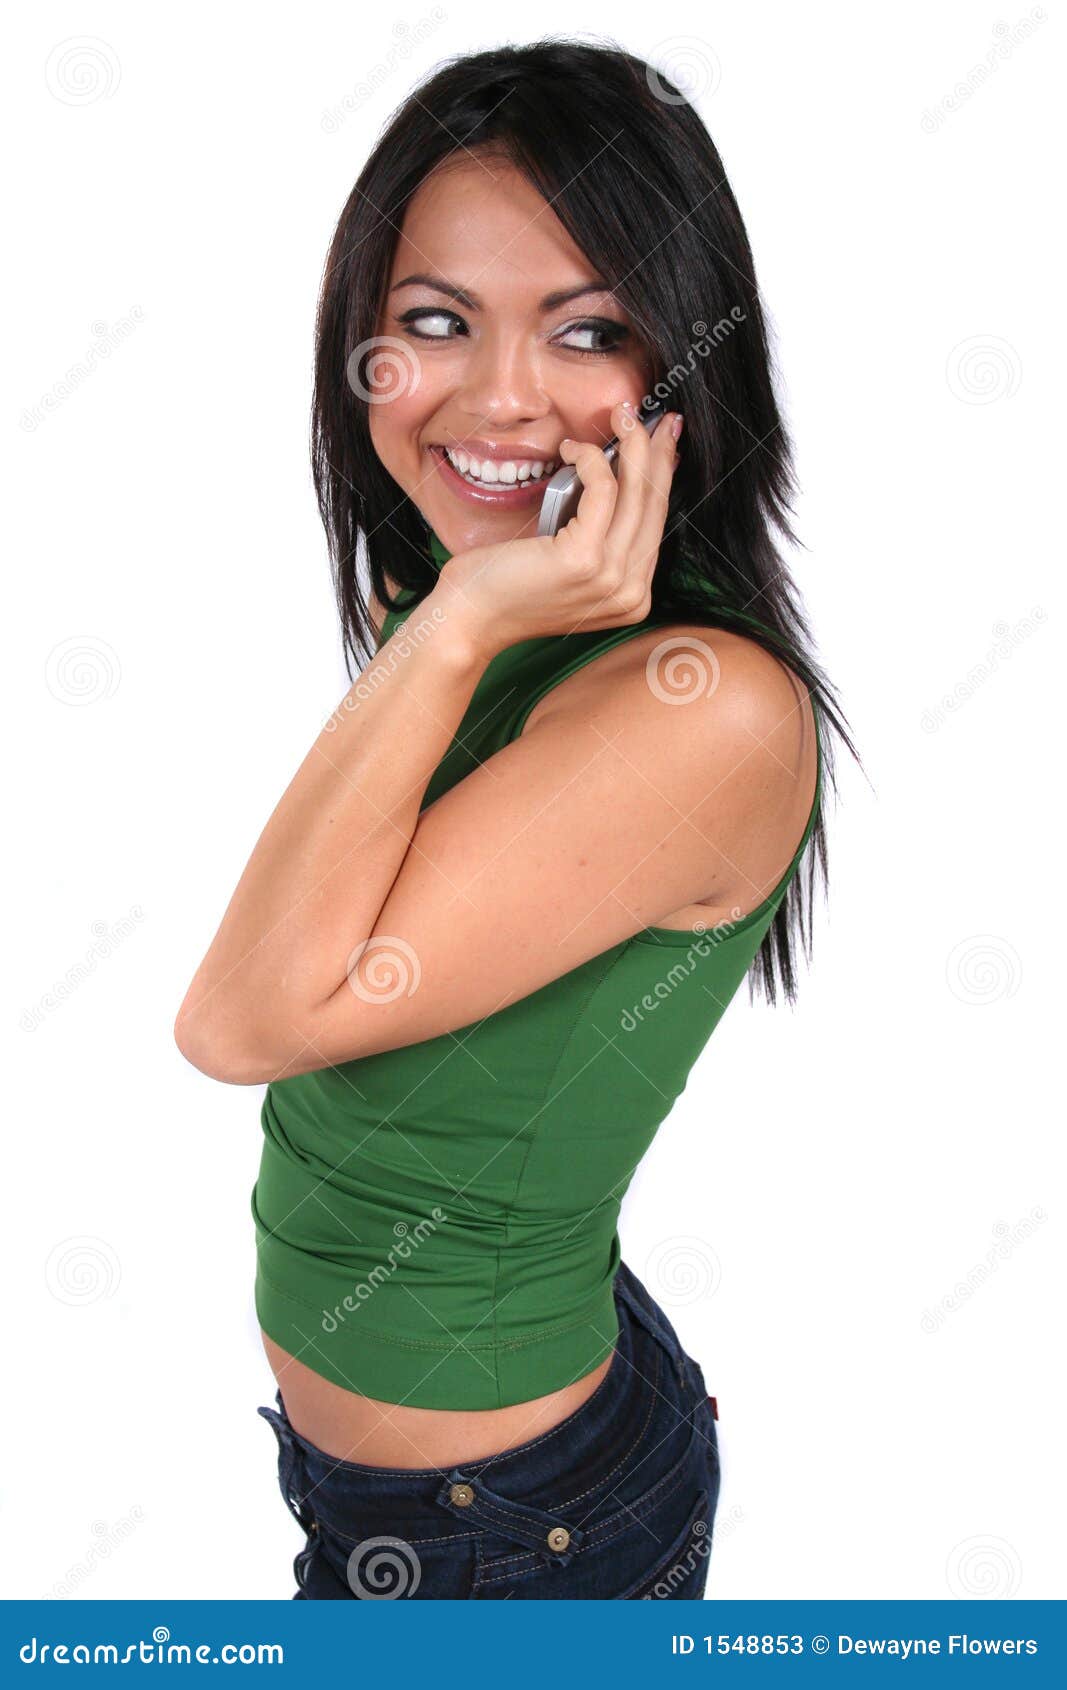 Cute Girl With Cell Phone Stock Photos - Image: 1548853